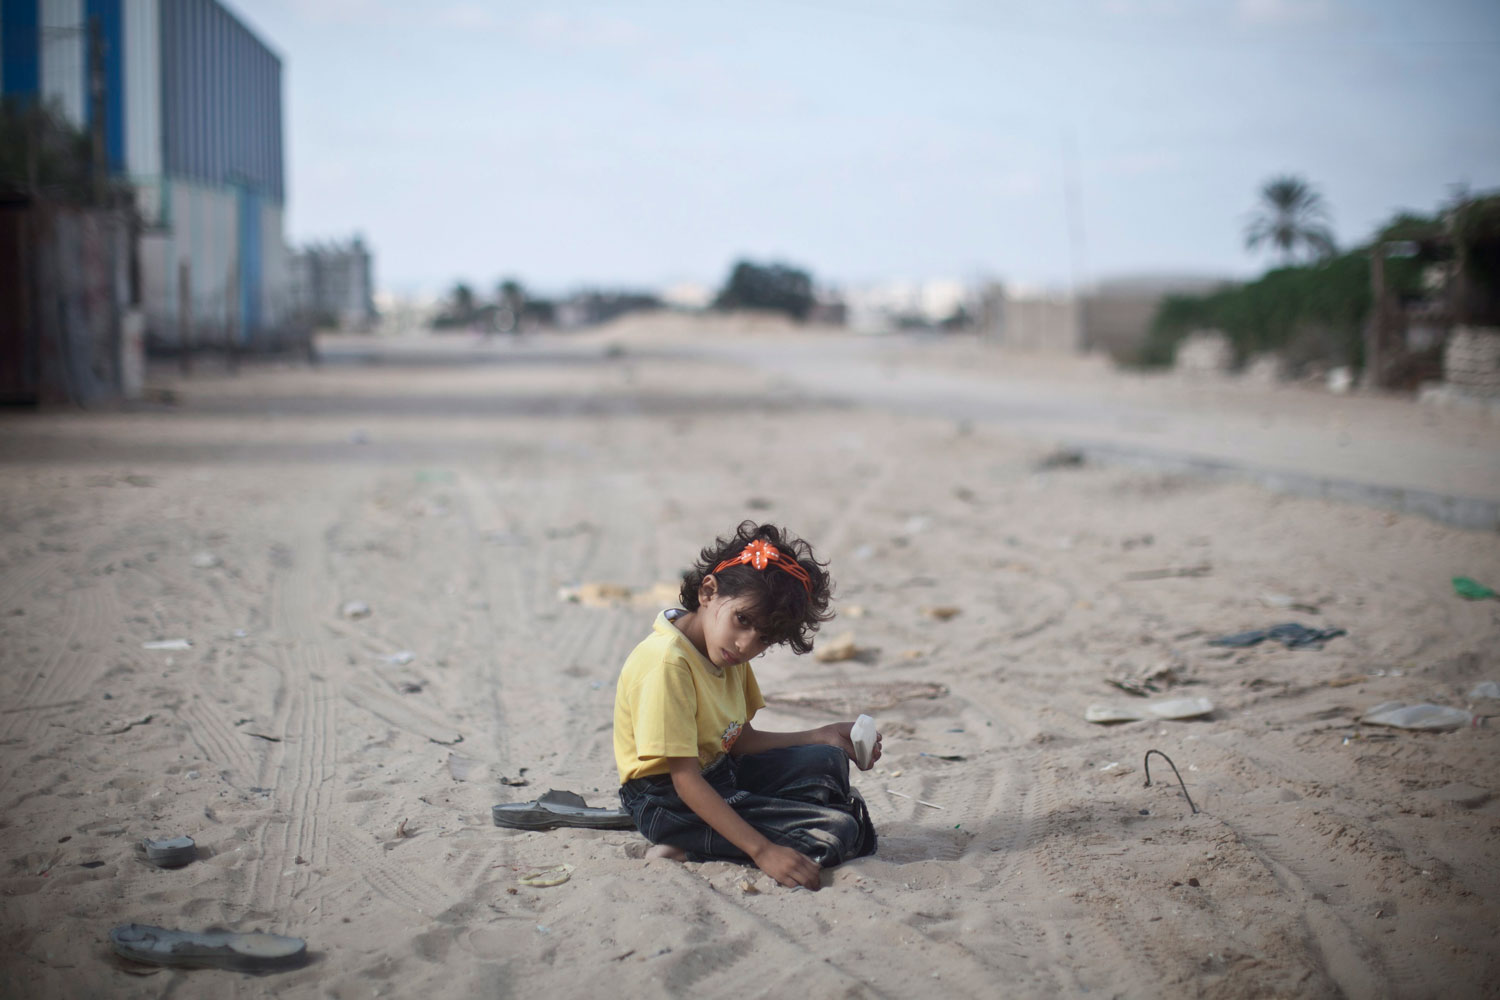 Image: Nov. 7, 2012. A young Palestinian girl plays with sand on a littered road in the Al-Shabora refugee camp in Rafah, southern Gaza.